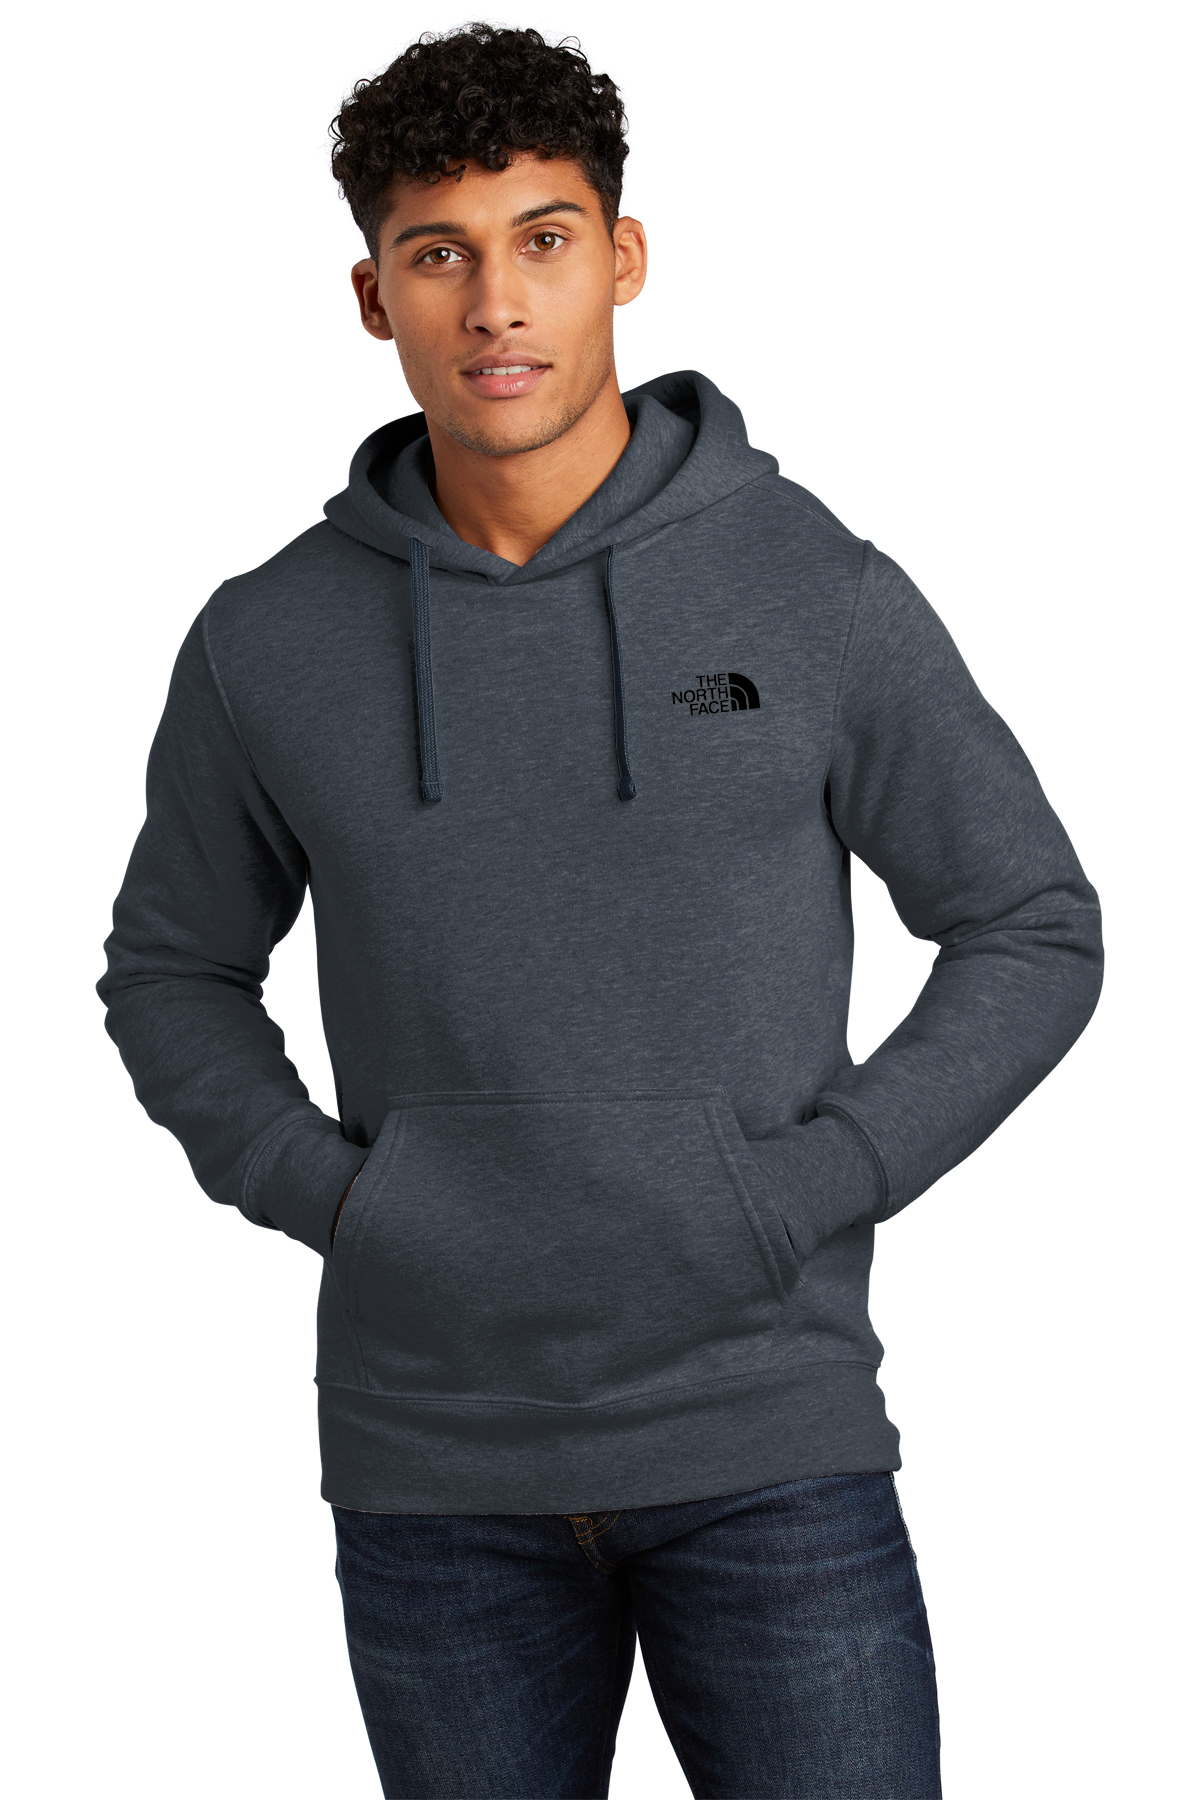 Vector Mockup Full Zip up Hoodie Over Face Illustrator, EPS, PDF, and PNG 